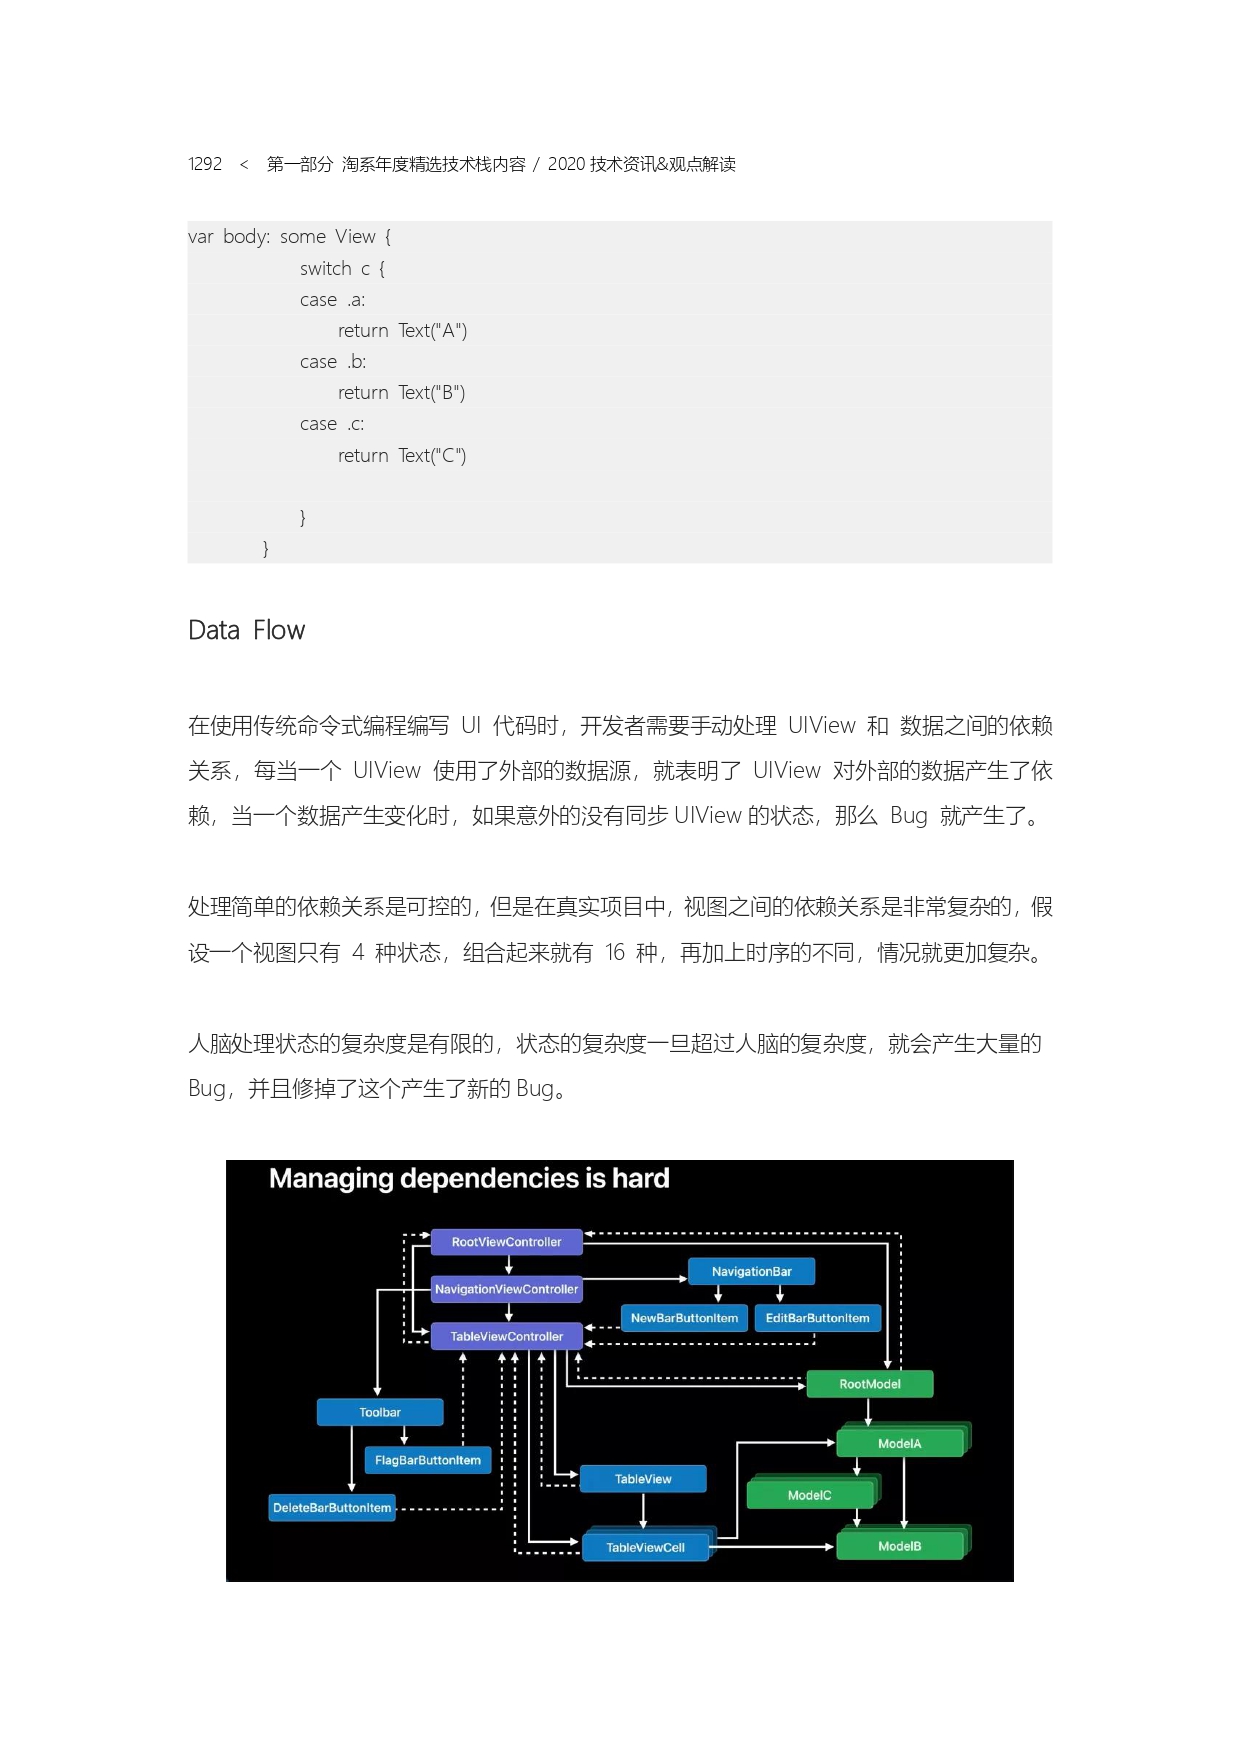 The Complete Works of Tao Technology 2020-1239-1312_page-0054.jpg